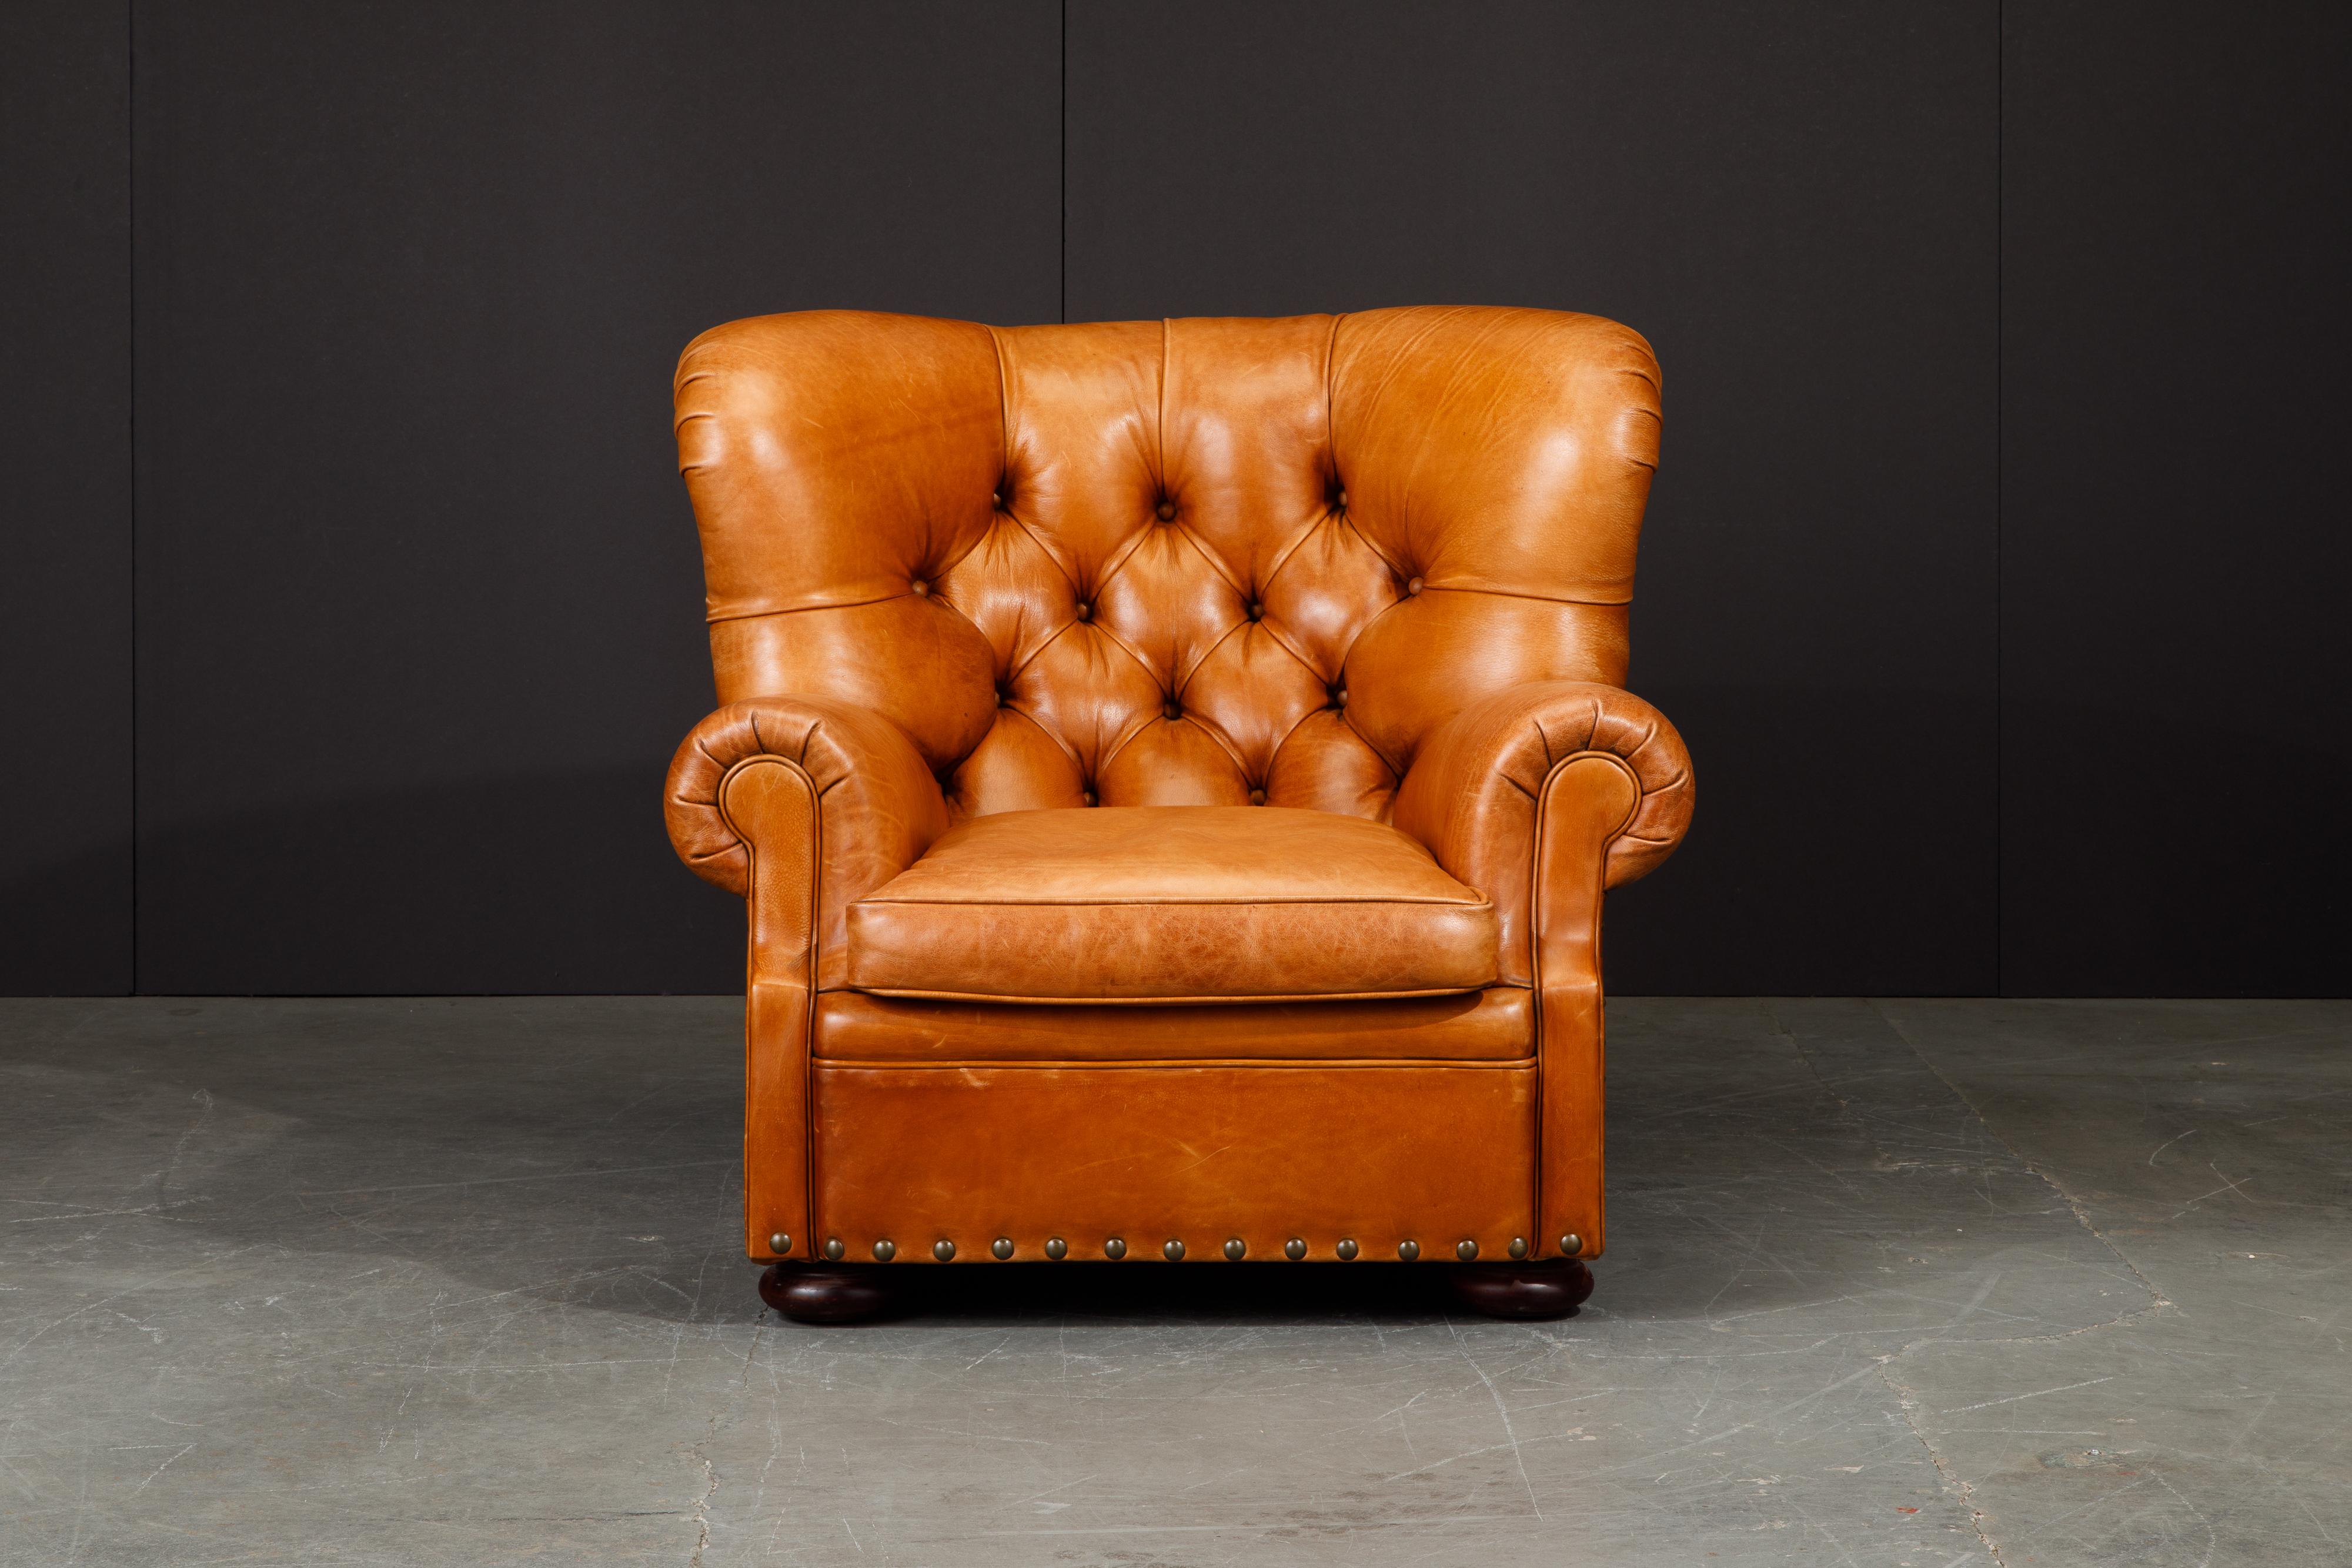 This gorgeous 'Writers' wingback club chair and ottoman by Henredon for Ralph Lauren has such incredible thick and quality natural leather hides. The original Writer's Chairs retailed by Ralph Lauren have been produced by Henredon in the United